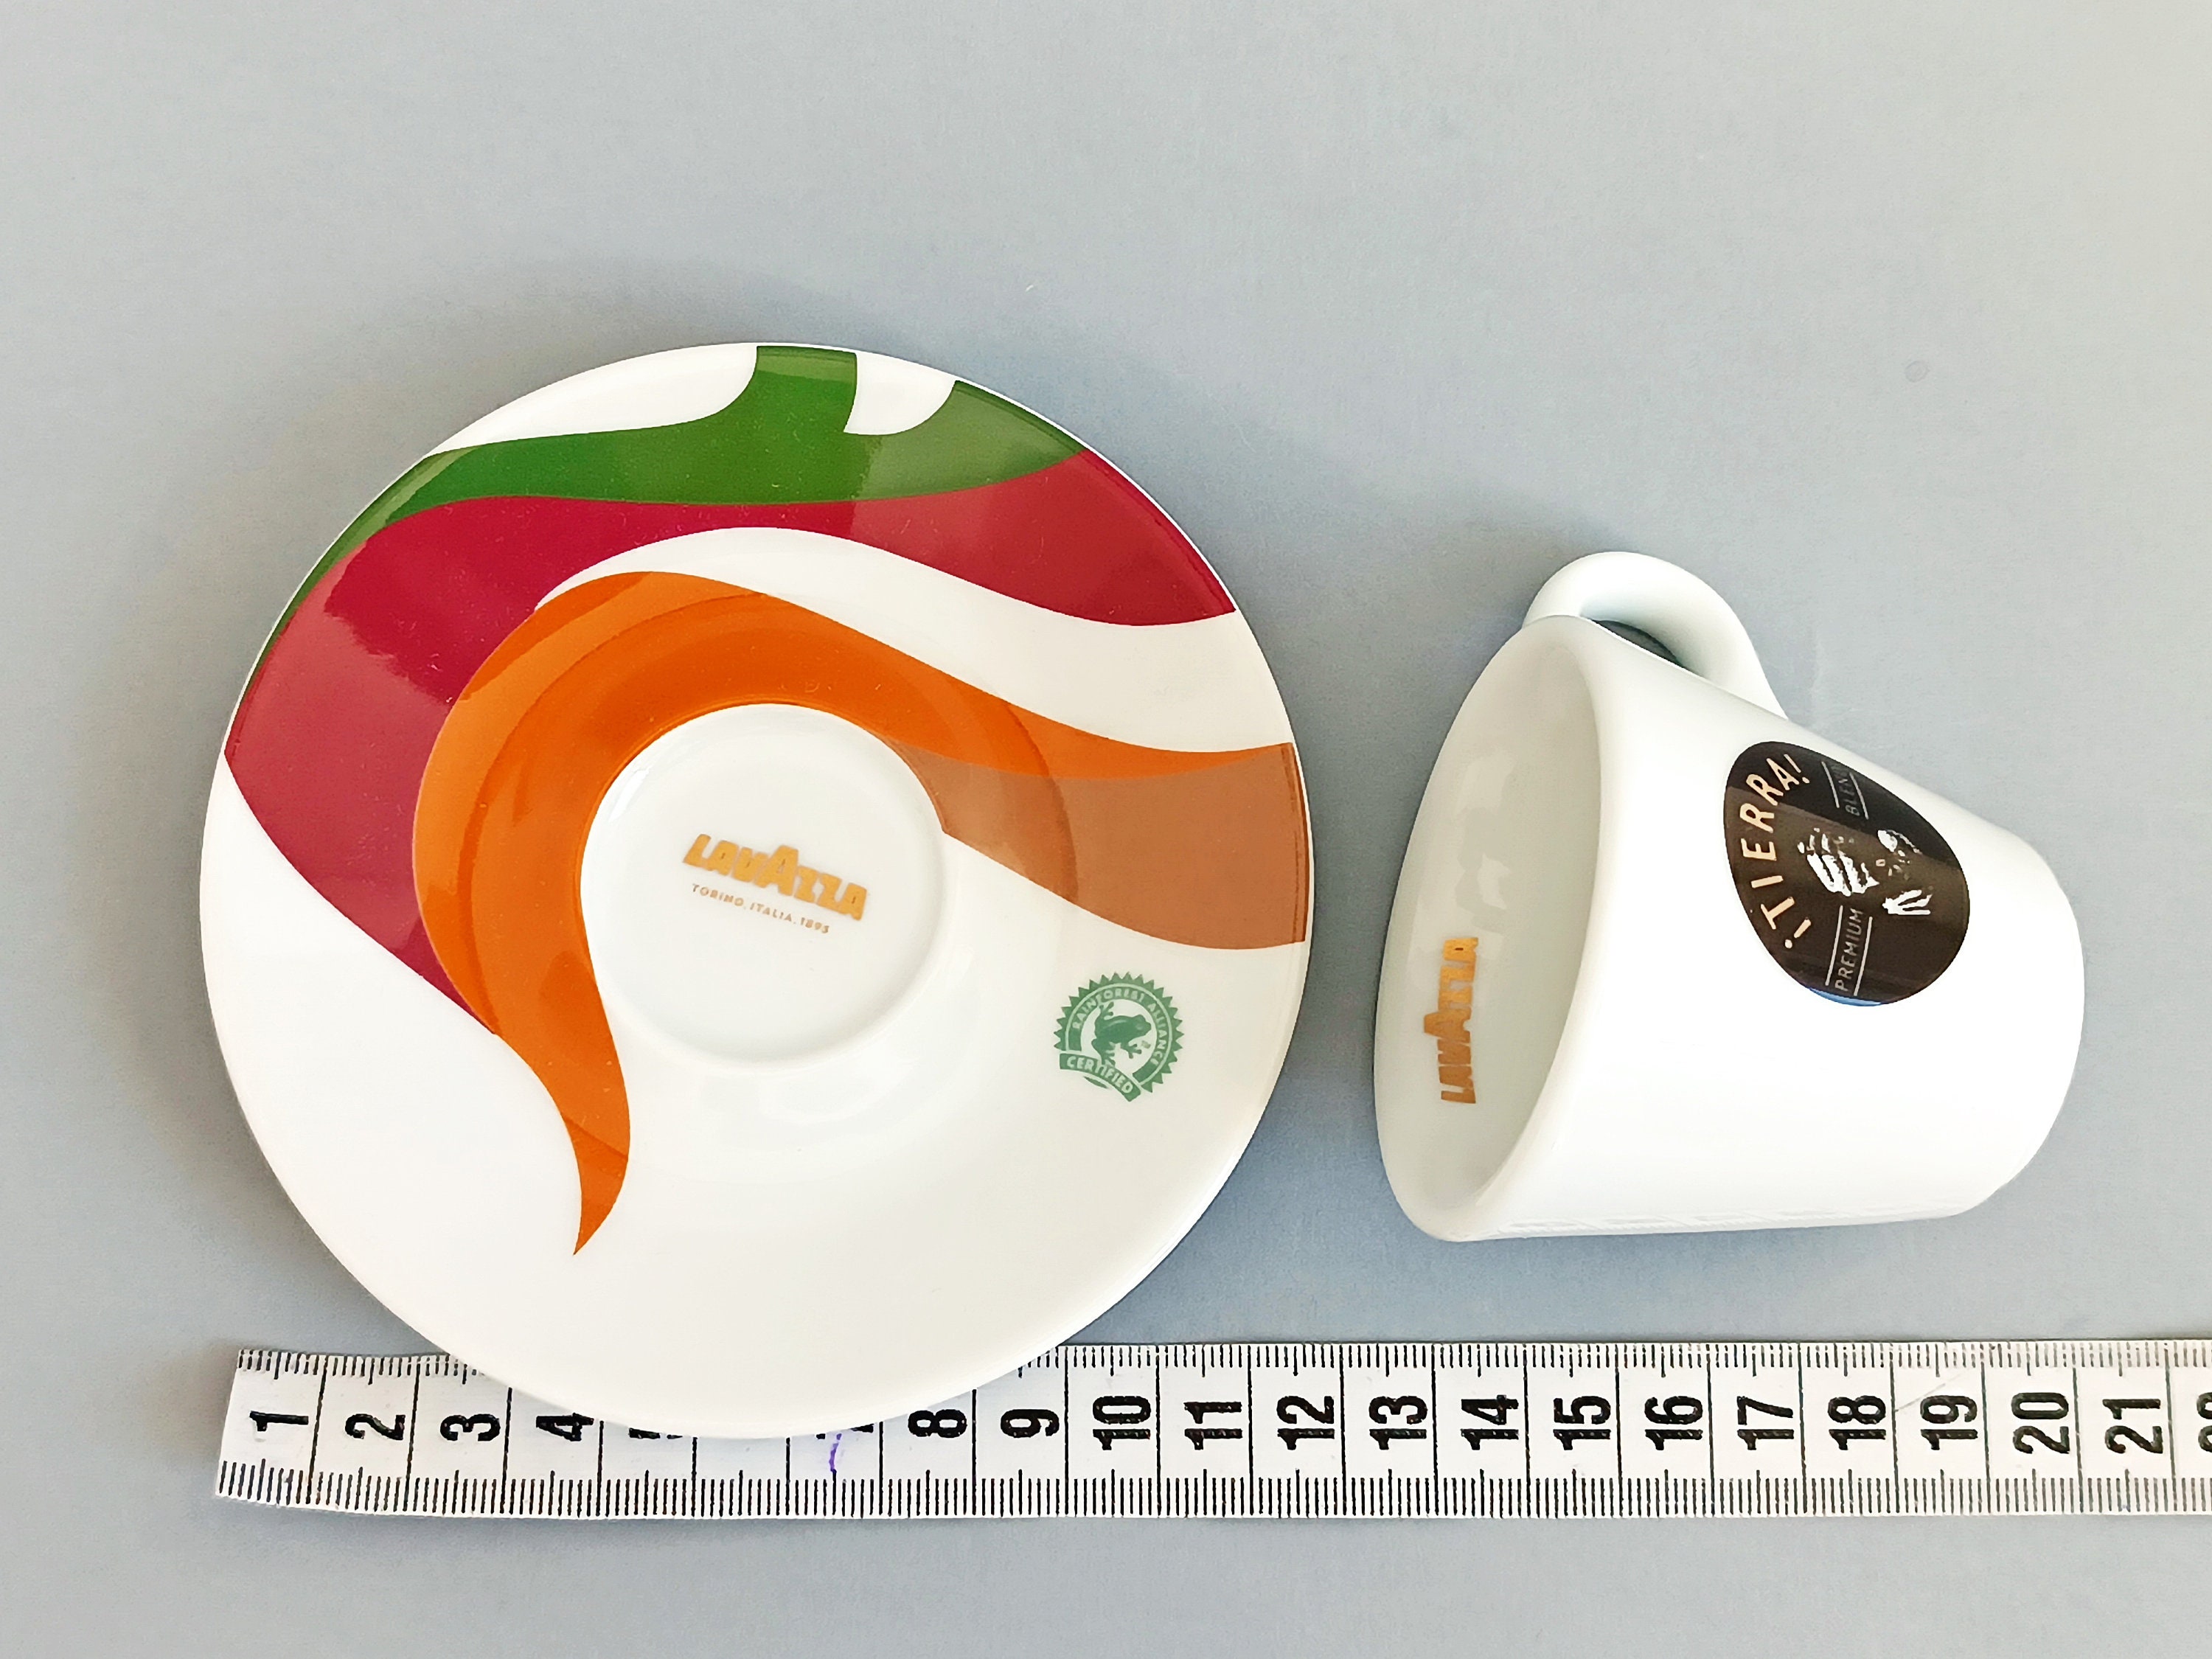 Set of 2 Lavazza Coffee Cups With Saucers Limited Edition Collectible Small  Coffee Cups Coffee Serving Set Espresso Cup Classic Coffee Mug 